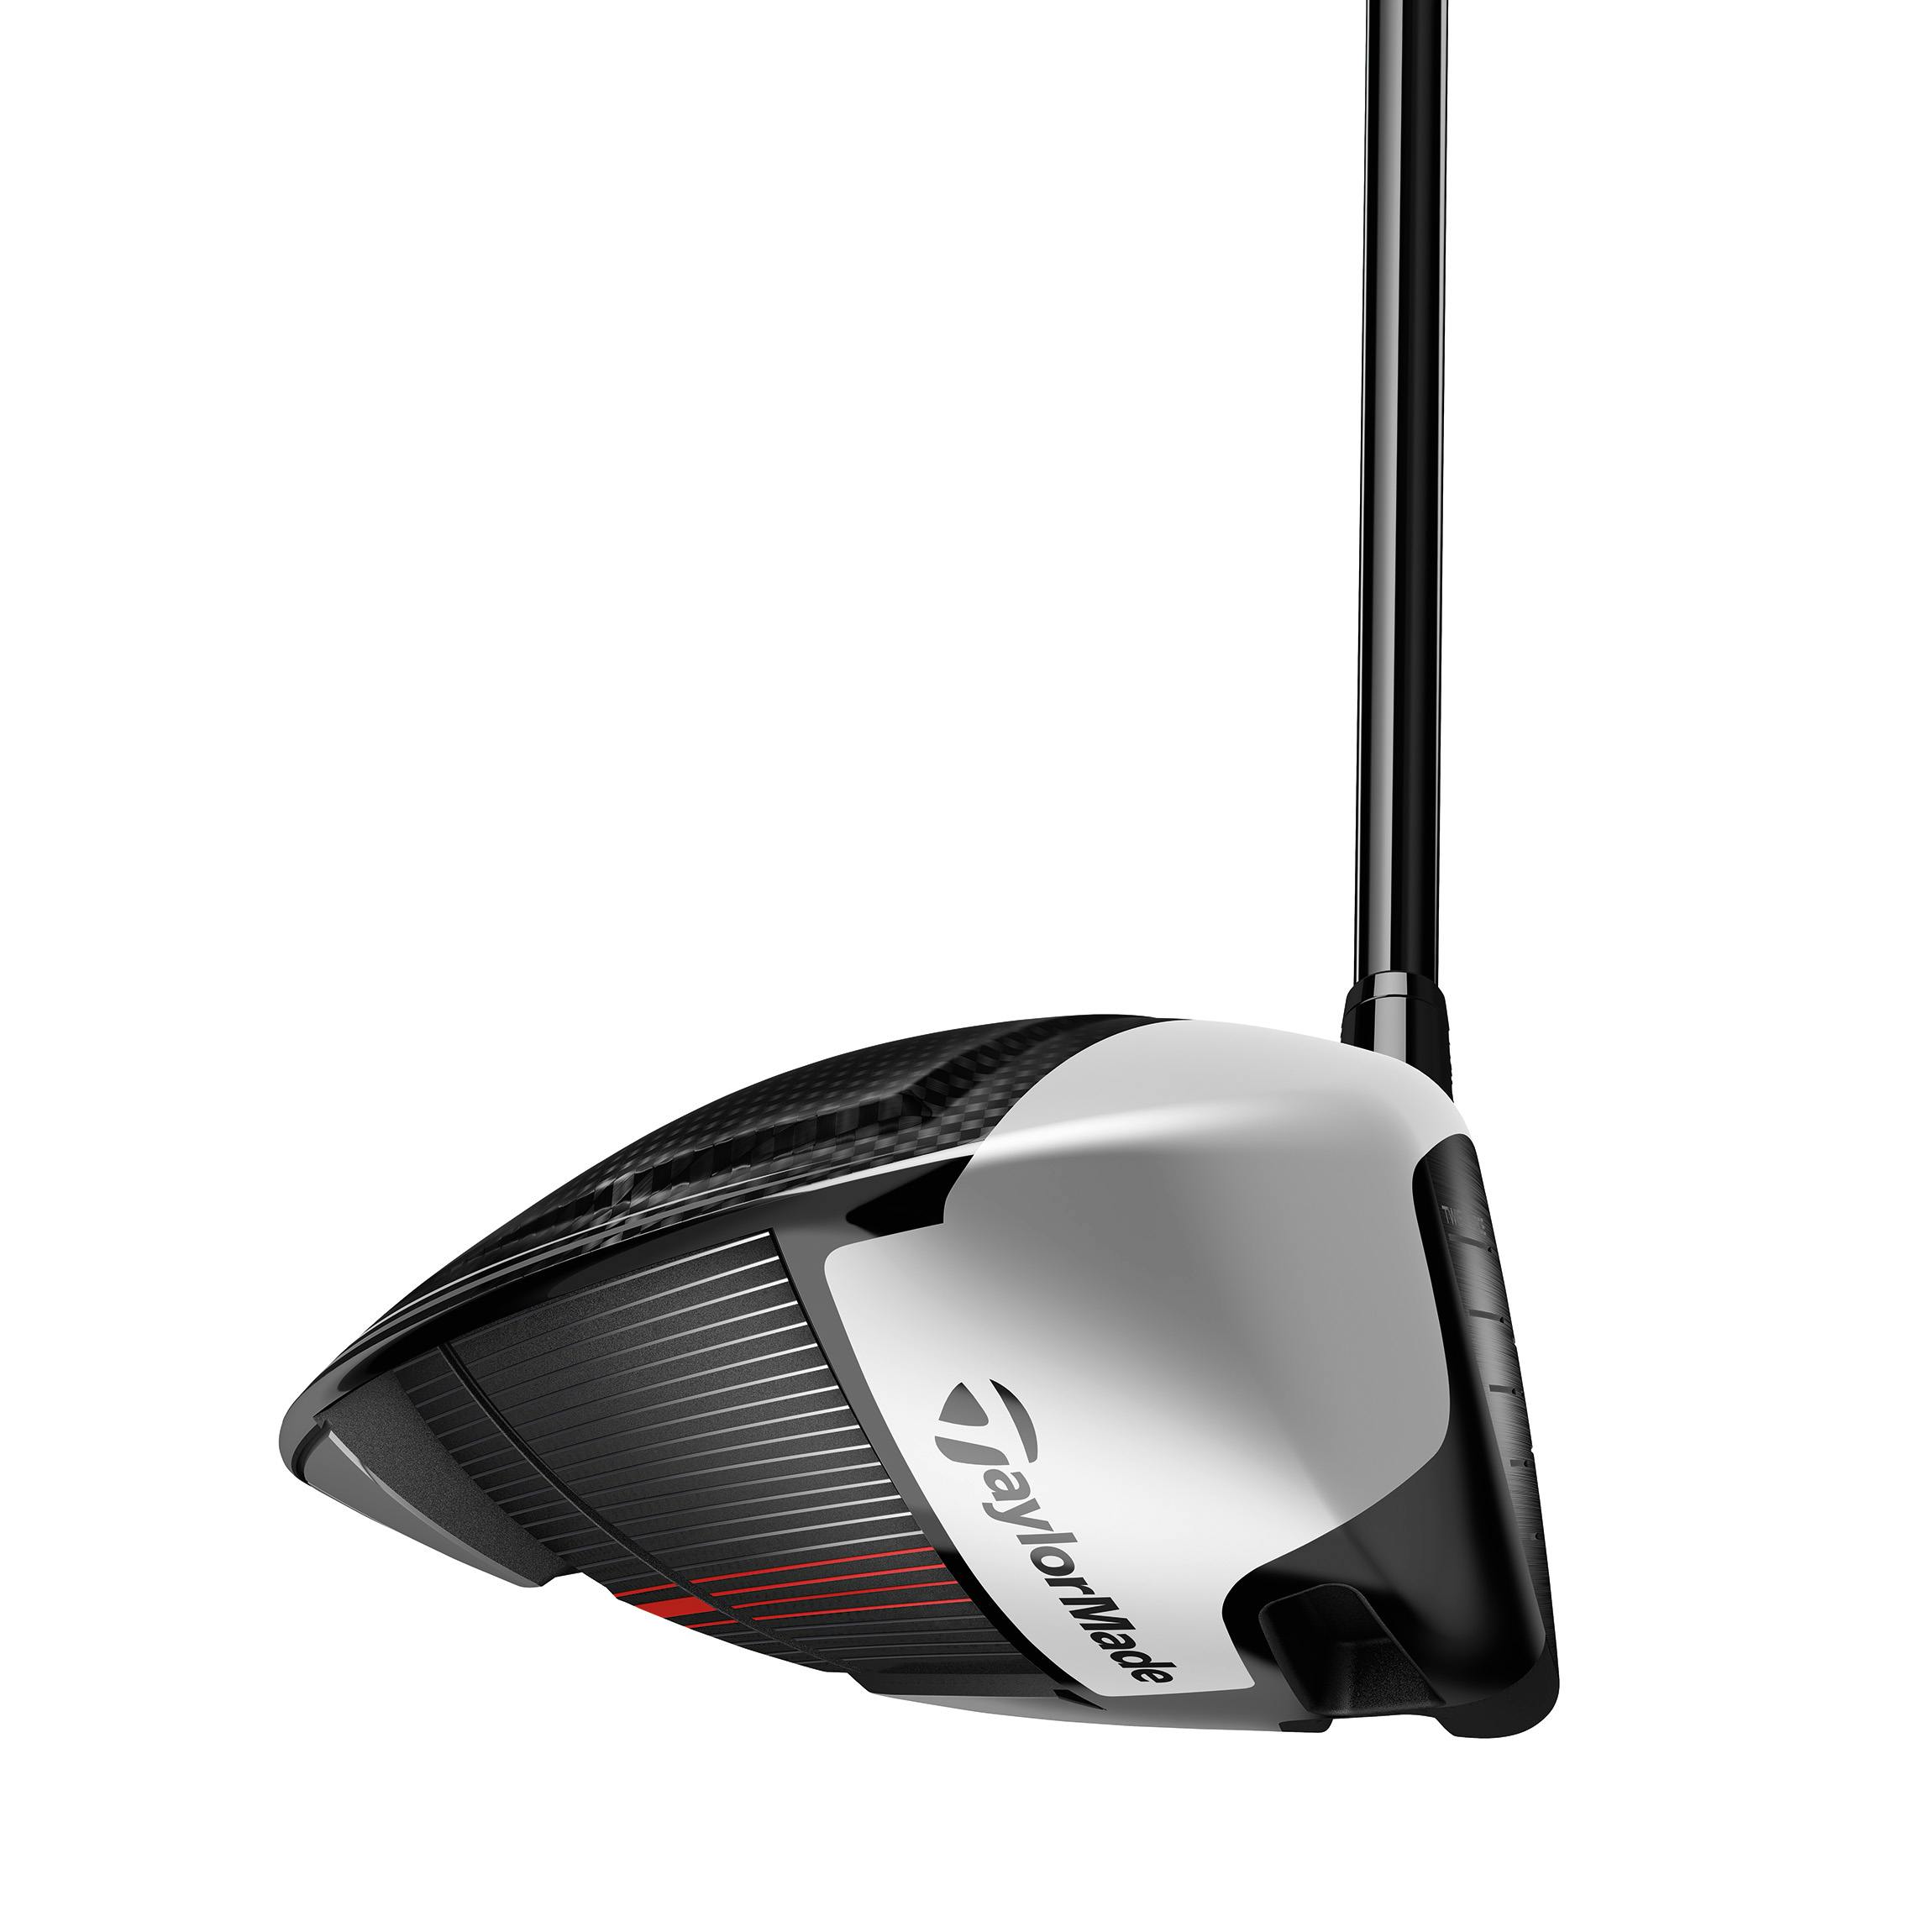 TaylorMade M4 Driver · Right handed · Regular · 10.5°